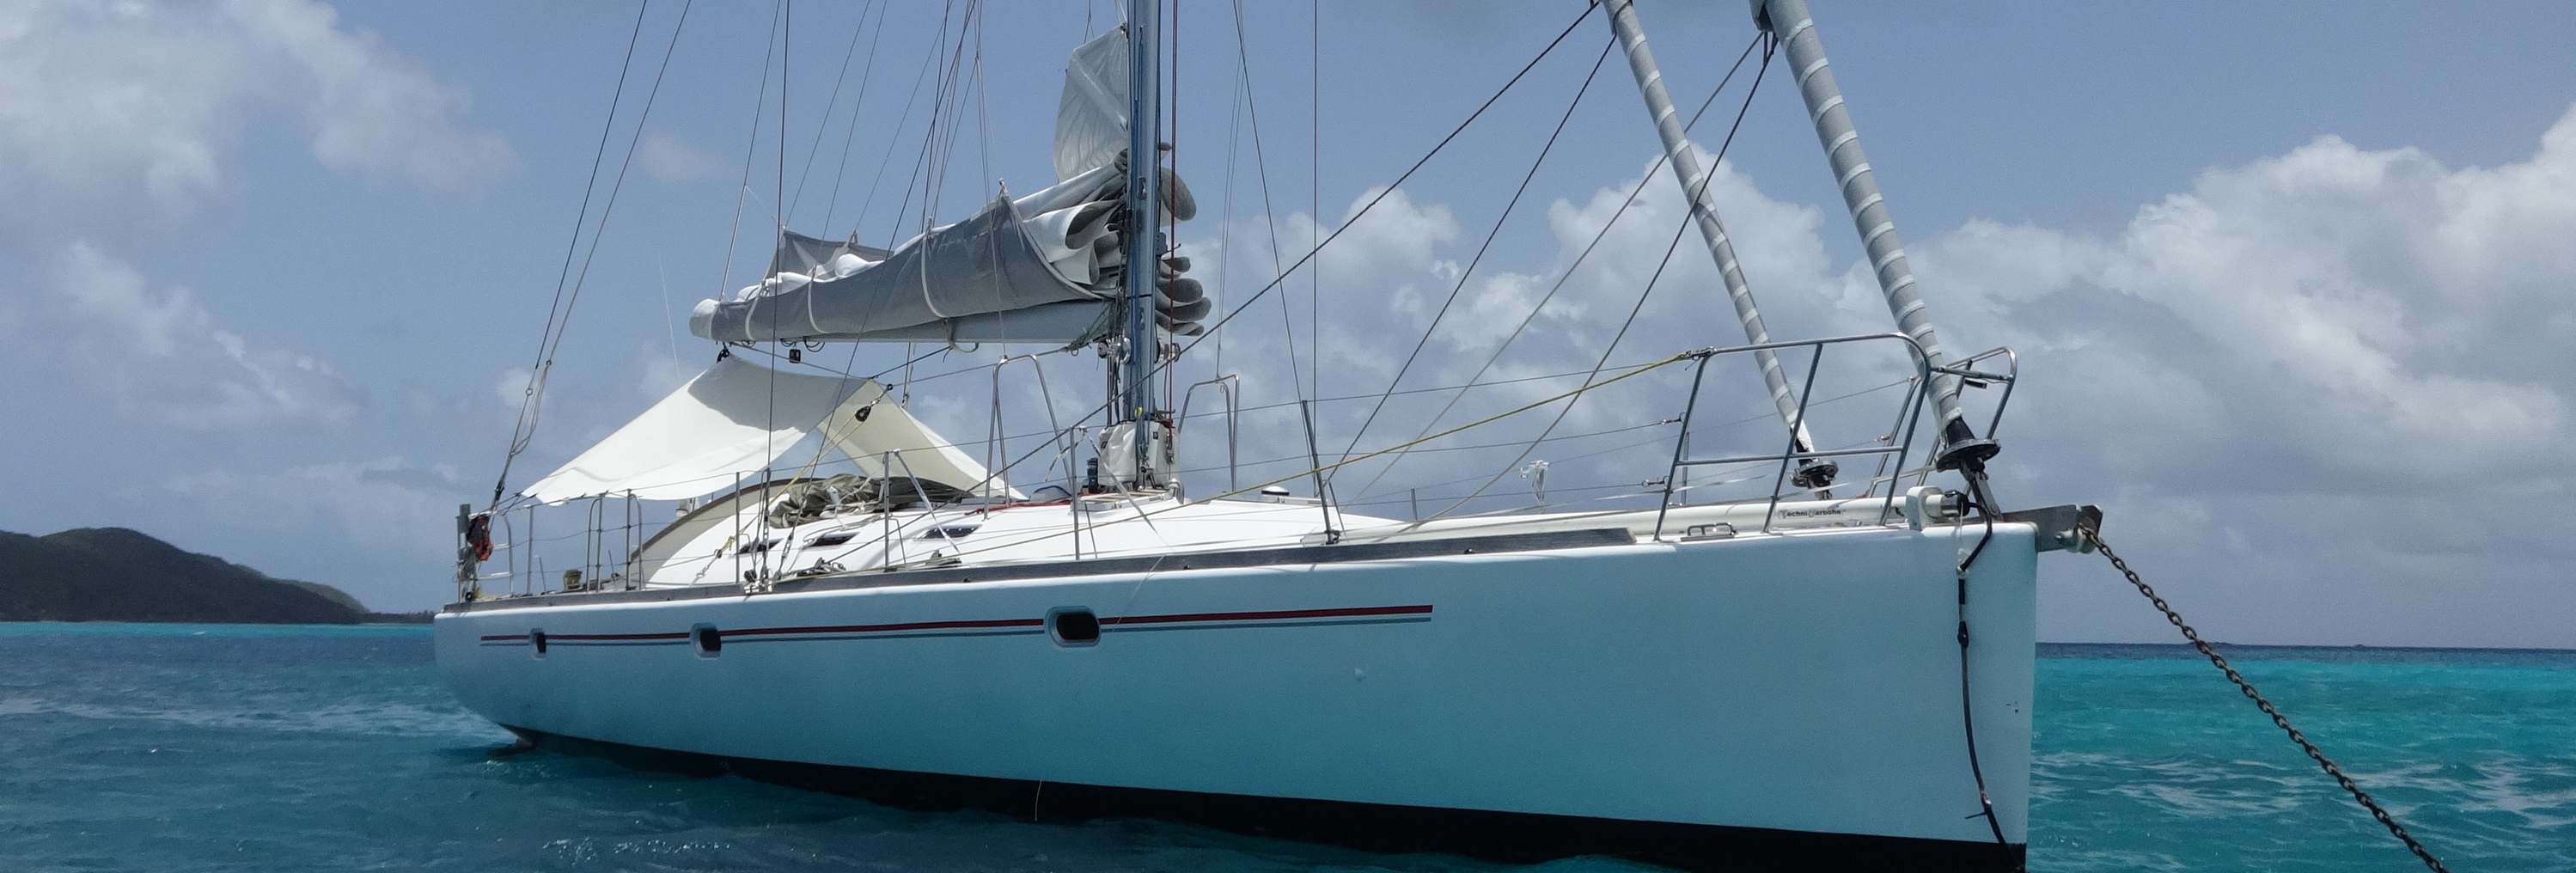 JOLLY JUMPER : New Yacht for Sale